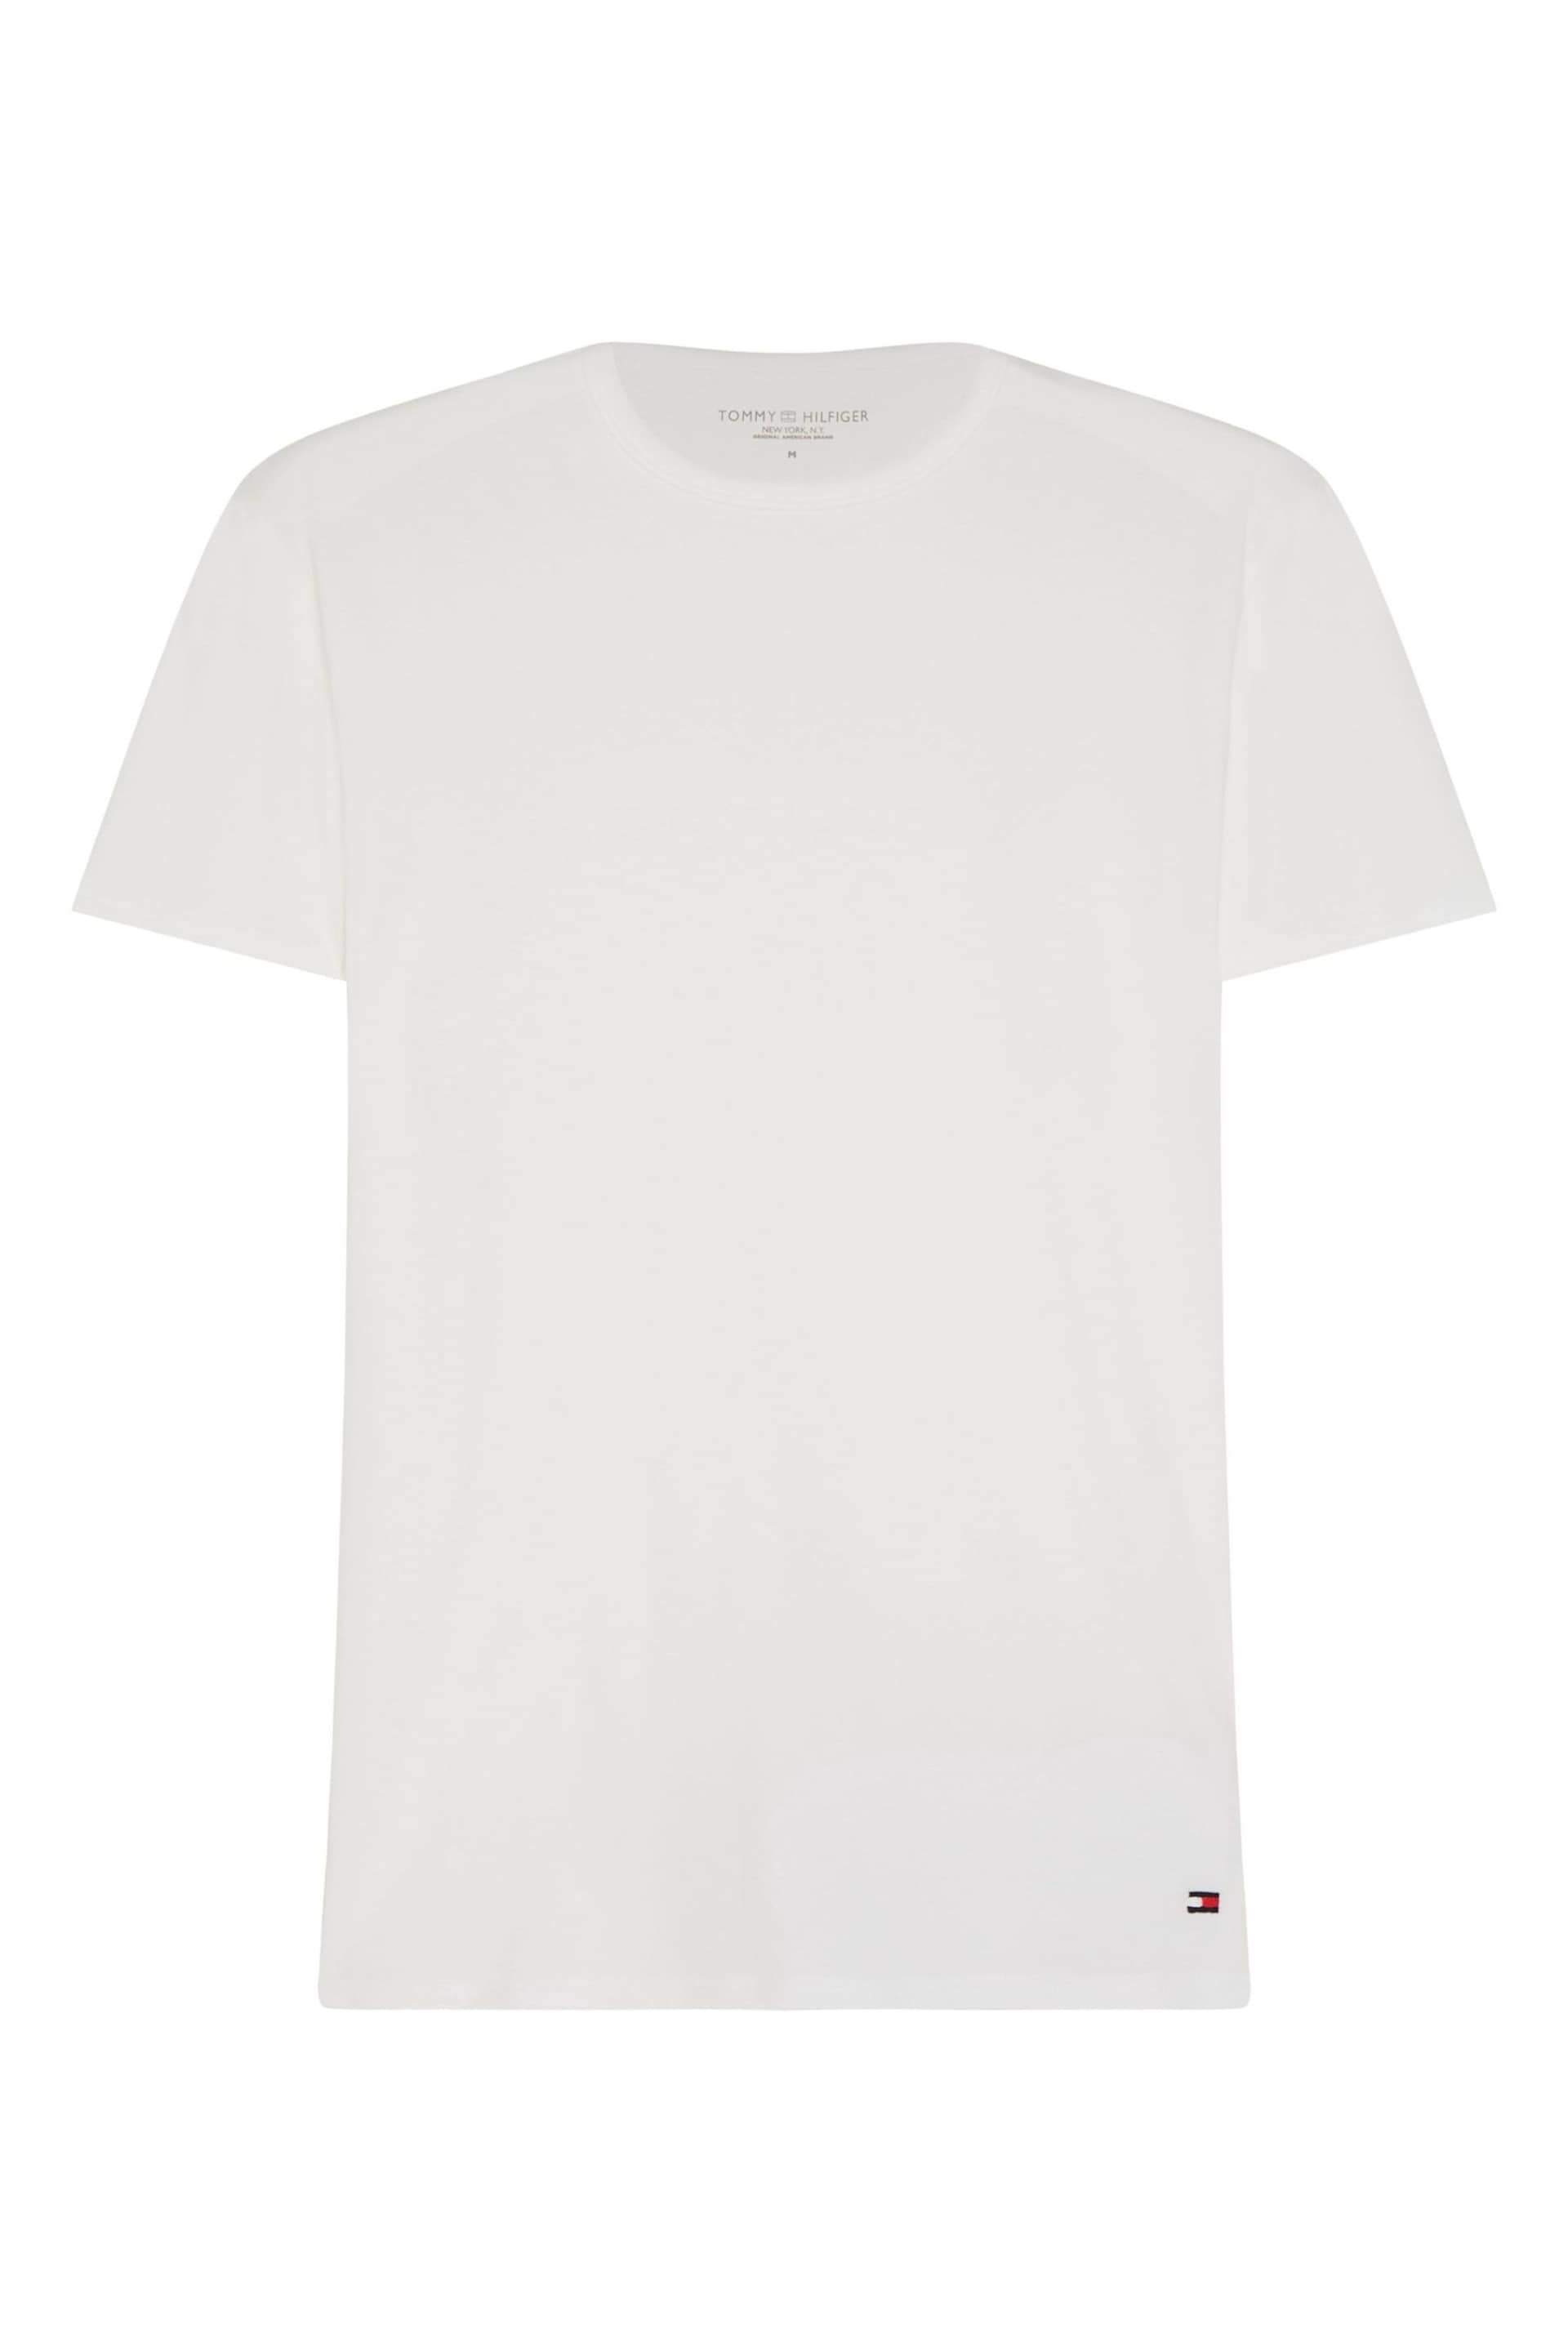 Tommy Hilfiger Premium Lounge T-Shirts 3 Pack - Image 6 of 6